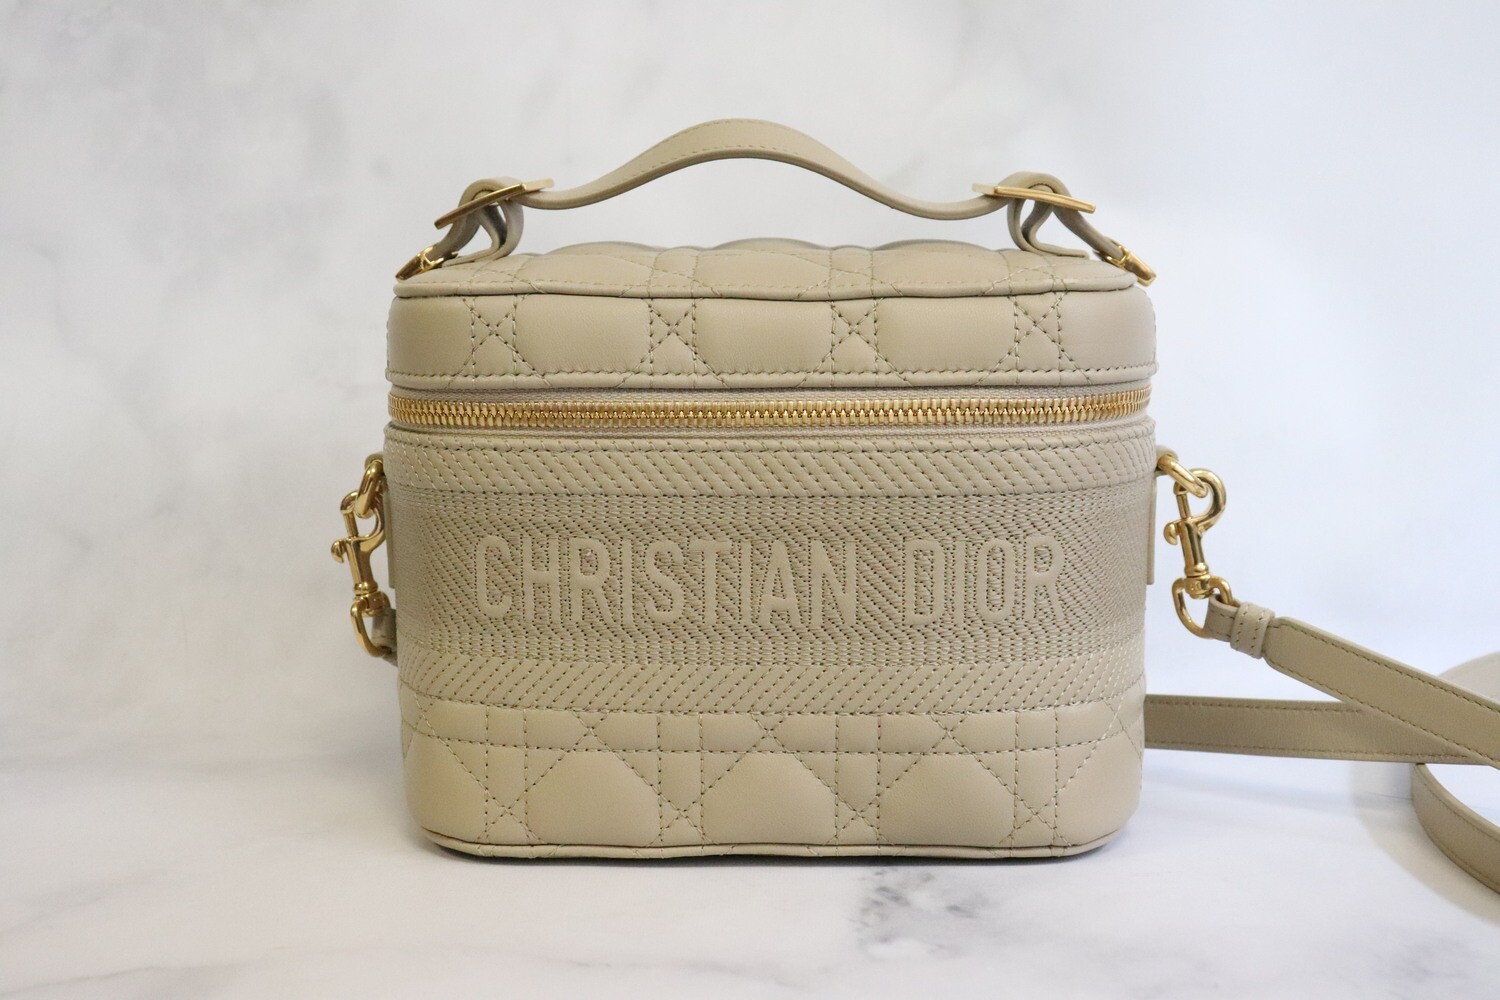 Dior Vanity Beige Leather, Gold Hardware, Preowned (Mint Condition) - No Dustbag